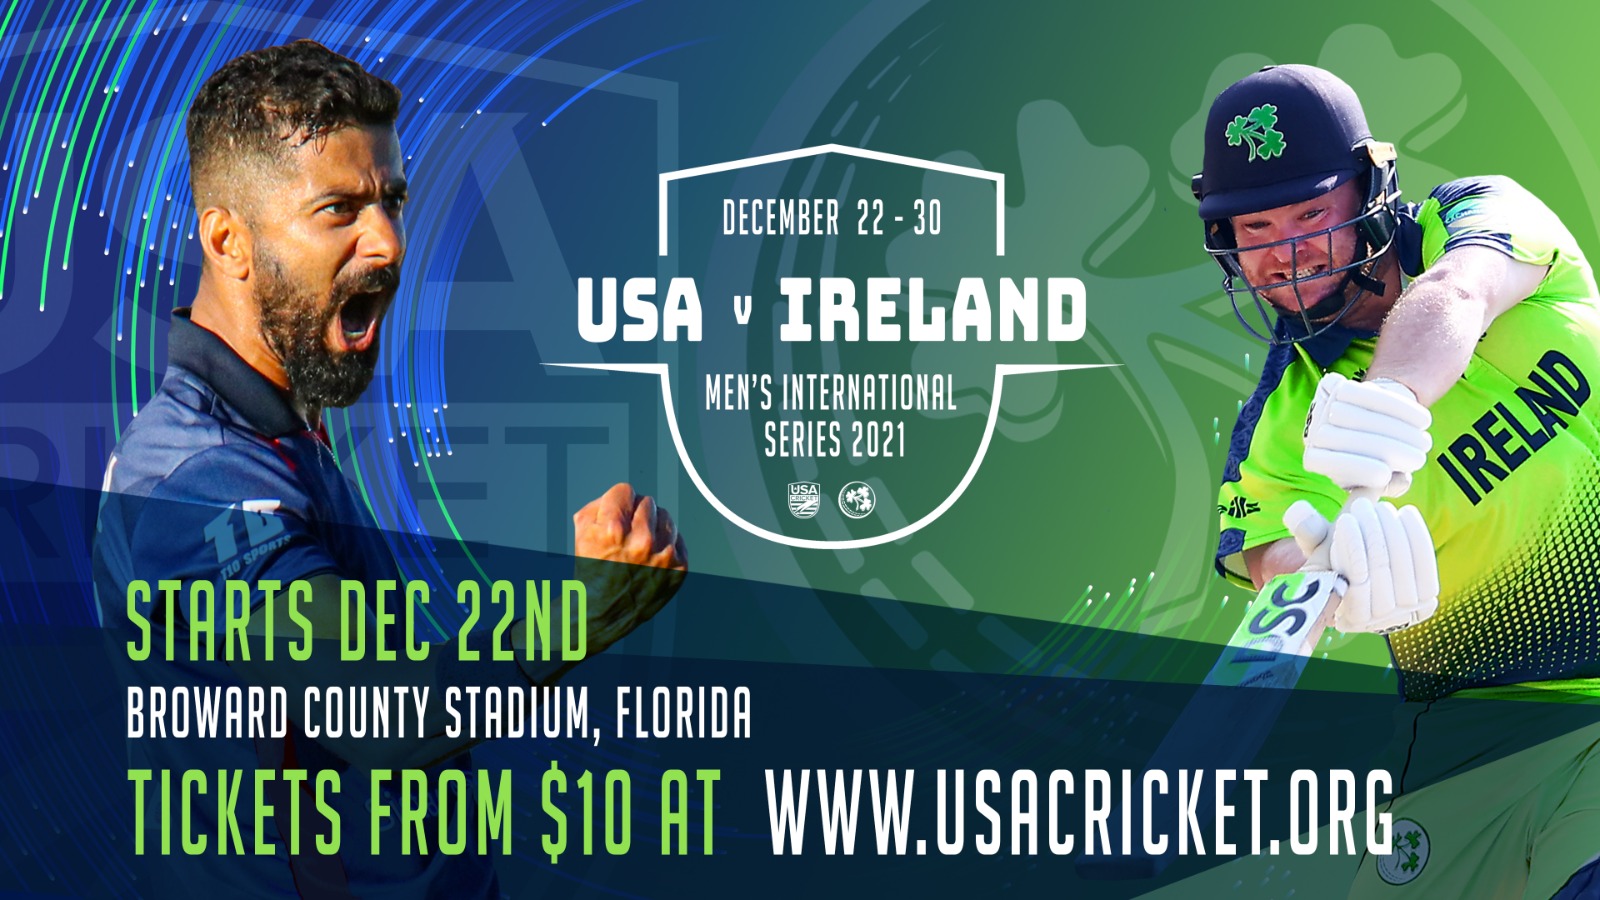 Tickets Go On Sale for Historic Irish Series in Florida